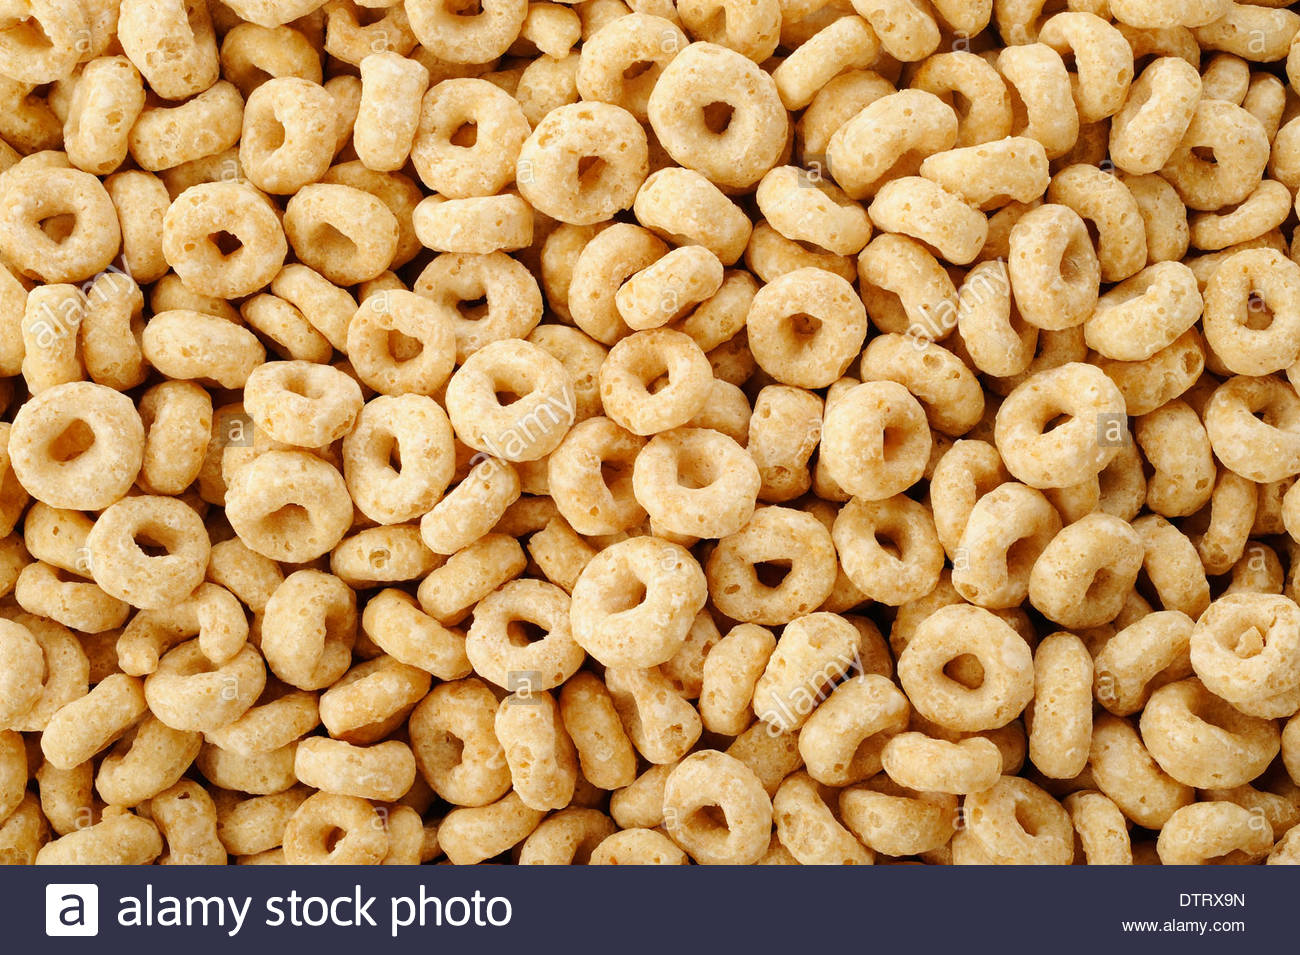 Whole Grain Cheerios Cereal Background Stock Photo